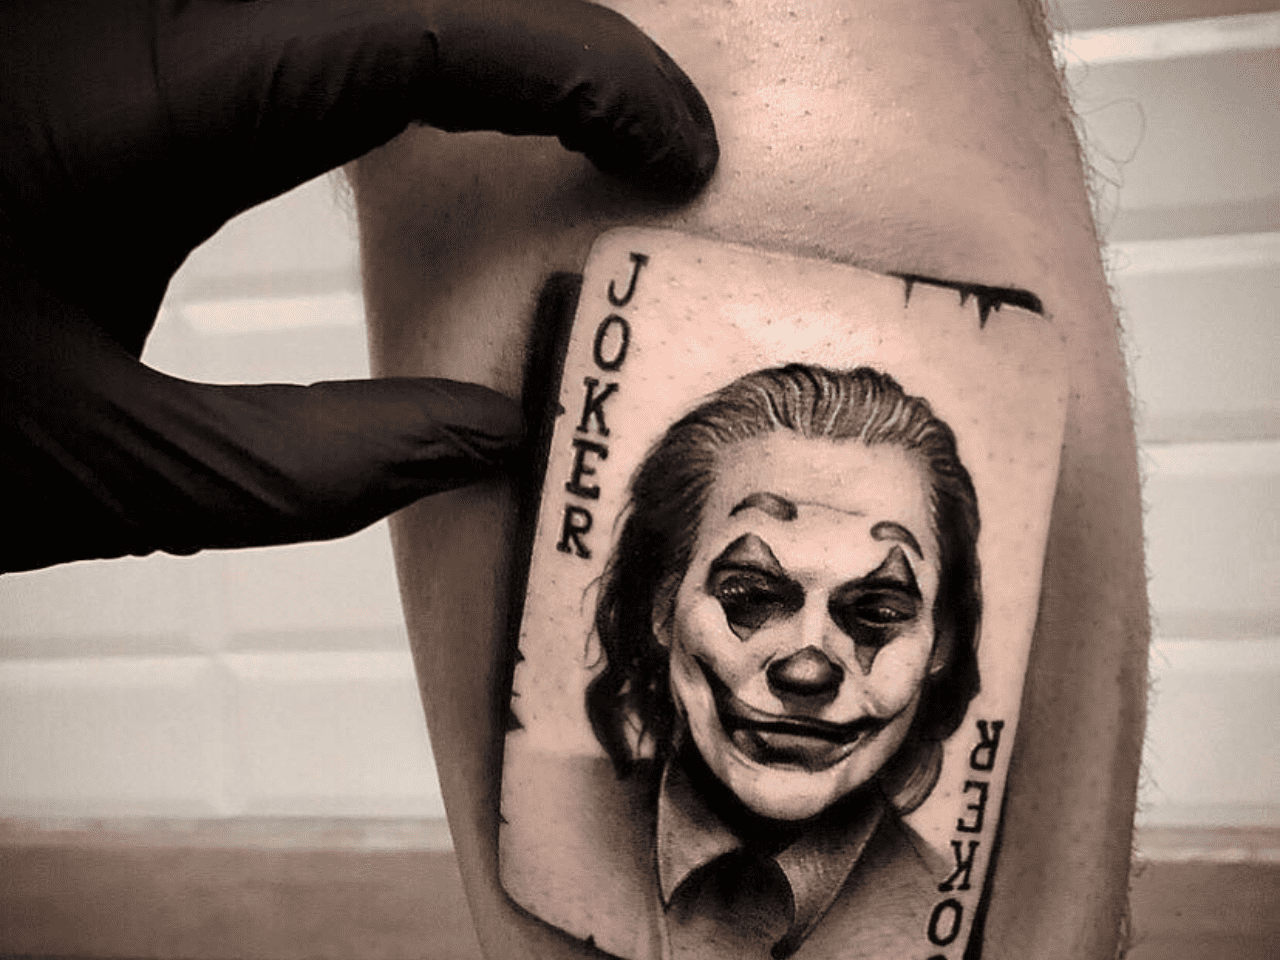 Joker Card Tattoo Symbolism Meanings  More